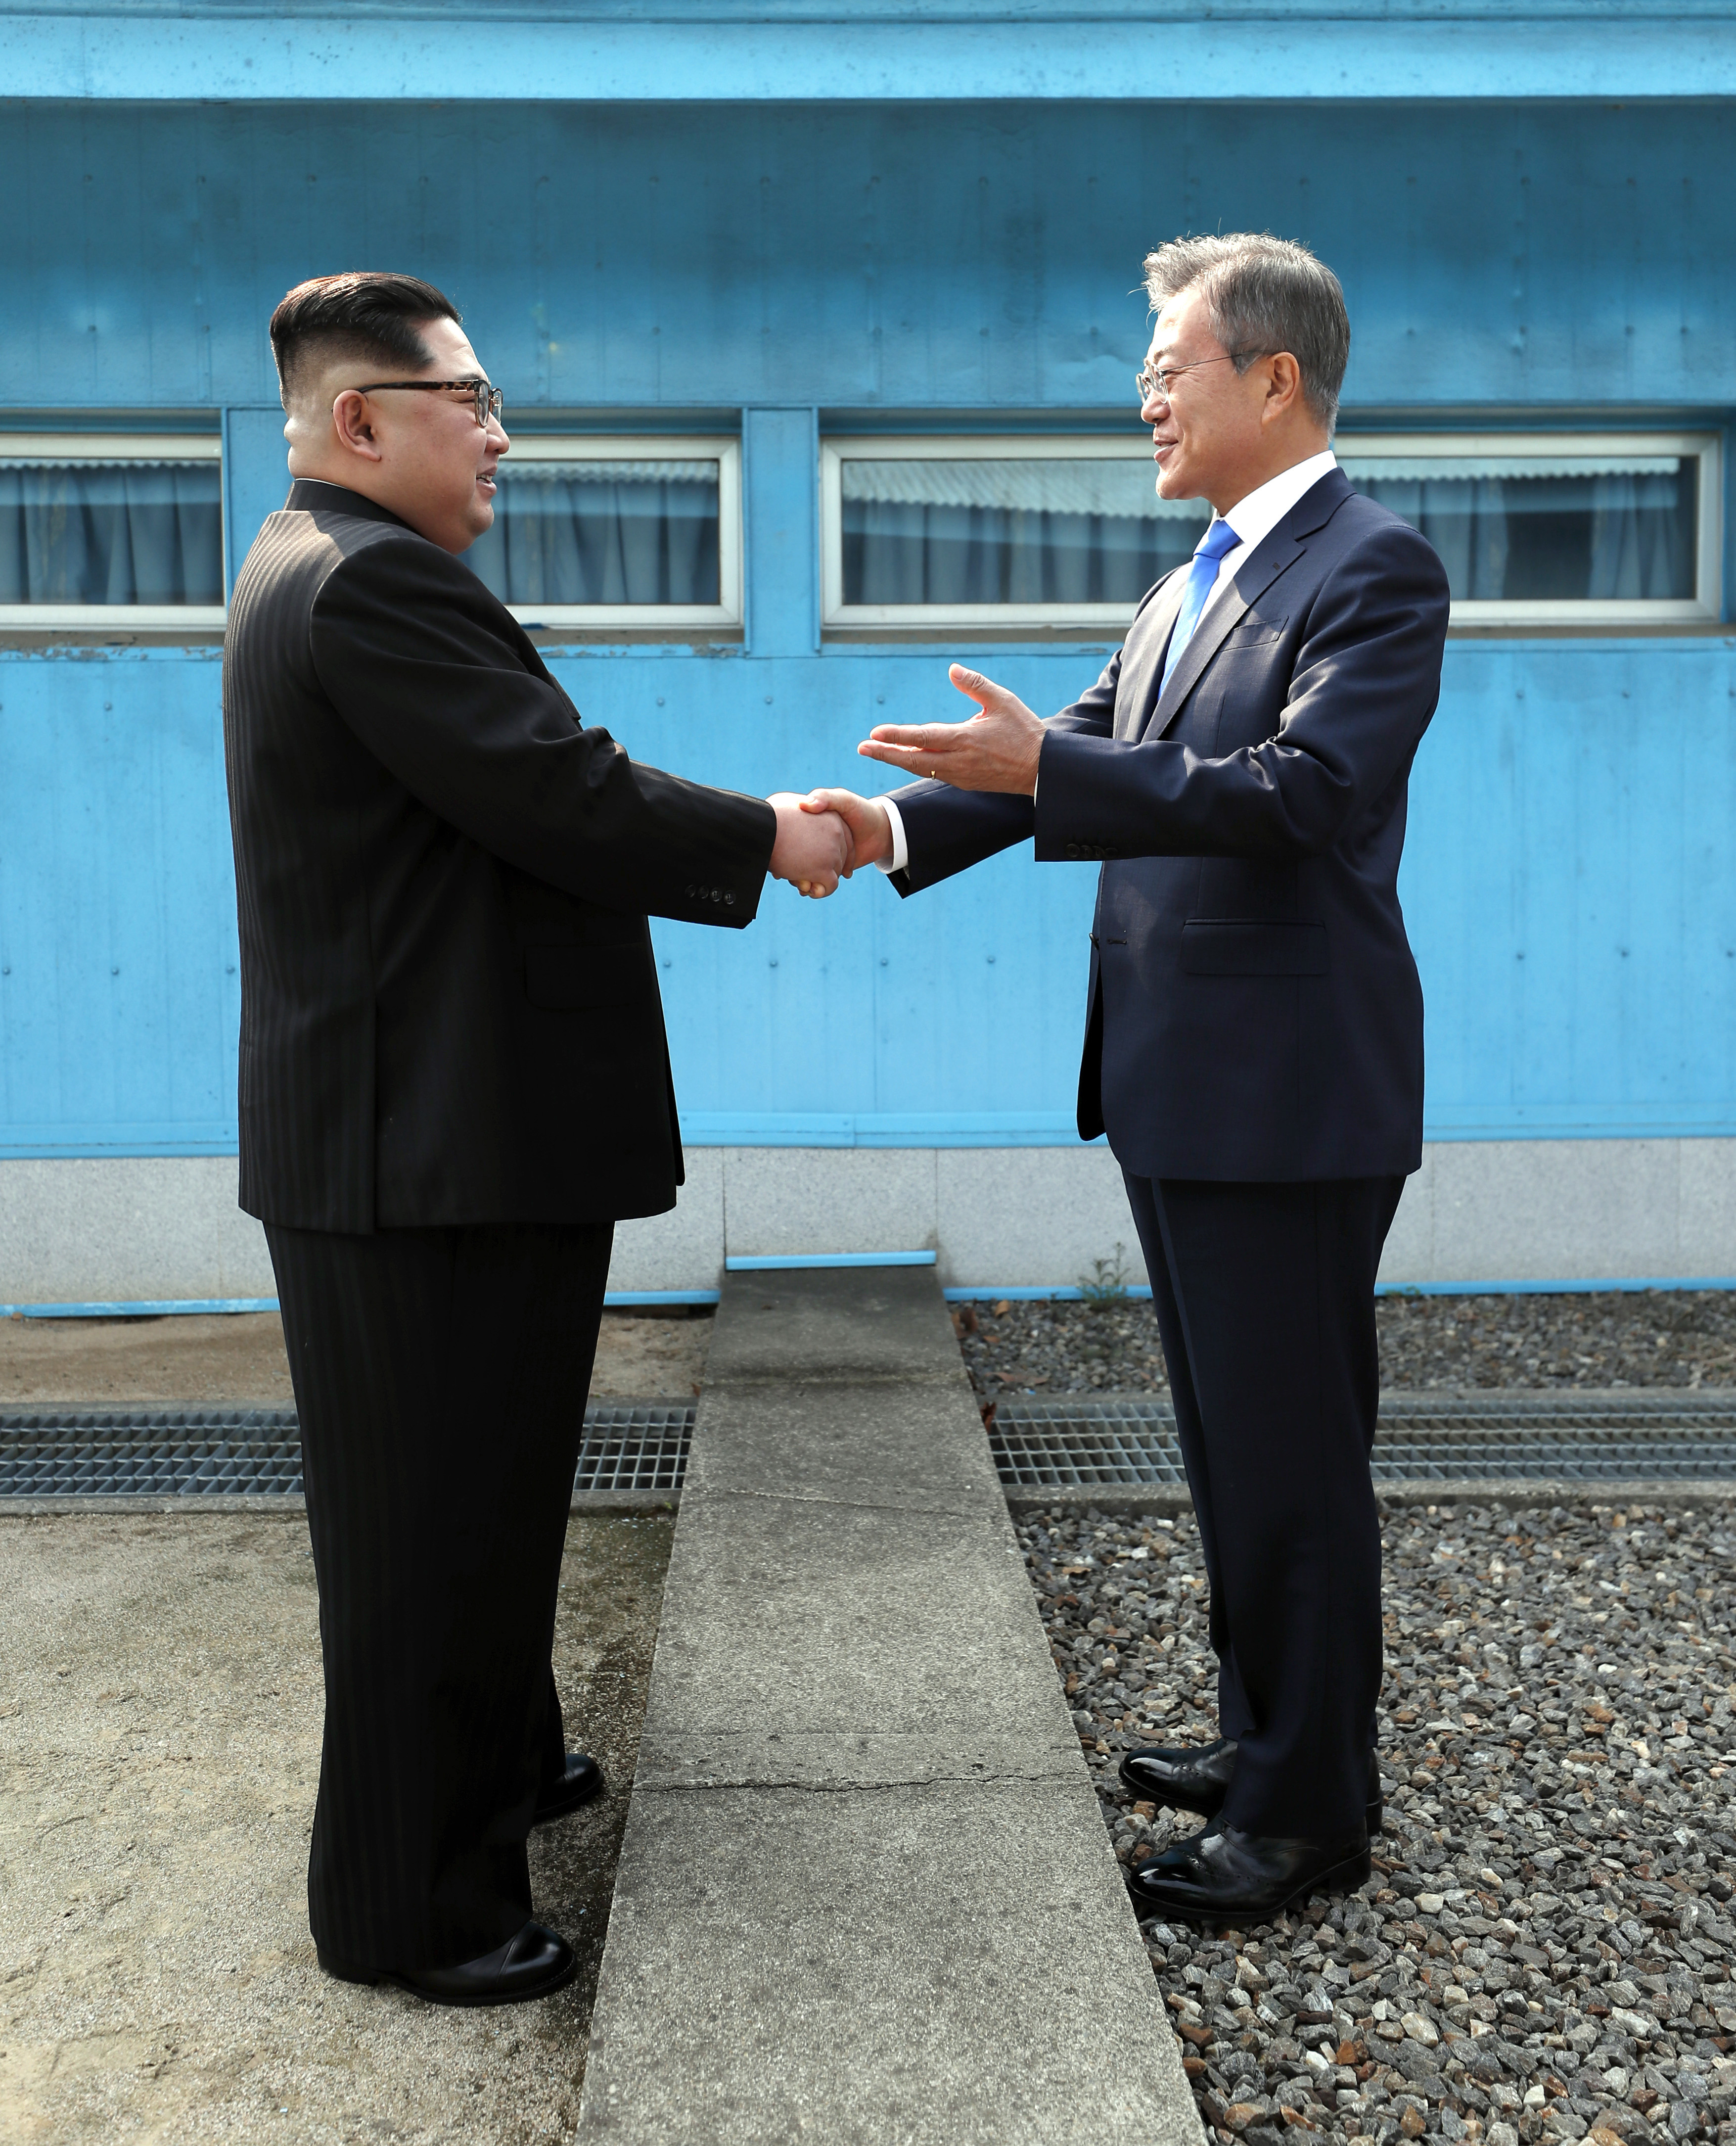 PANMUNJOM, SOUTH KOREA - APRIL 27: North Korean Leader Kim Jong Un (L) and South Korean President Moon Jae-in (R) shake hands over the military demarcation line upon meeting for the Inter-Korean Summit on April 27, 2018 in Panmunjom, South Korea. Kim and Moon meet at the border today for the third-ever inter-Korean summit talks after the 1945 division of the peninsula, and first since 2007 between then President Roh Moo-hyun of South Korea and Leader Kim Jong-il of North Korea. (Photo by Pool/Getty Images)